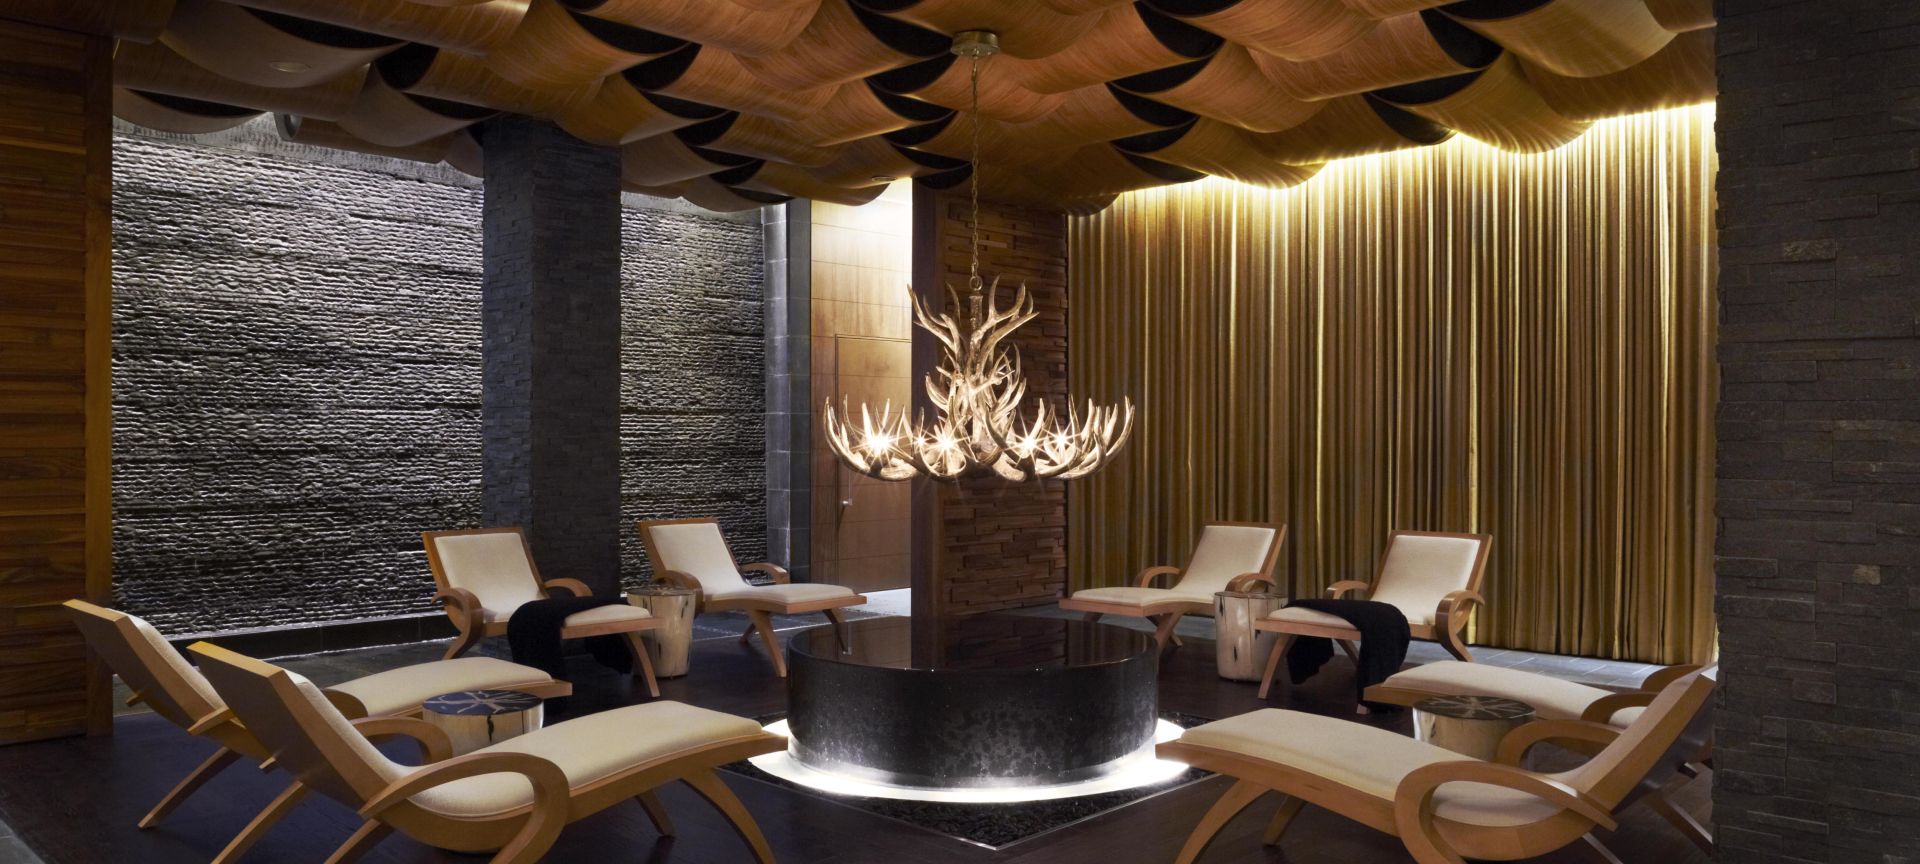 Relaxation area at the Viceroy Snowmass spa